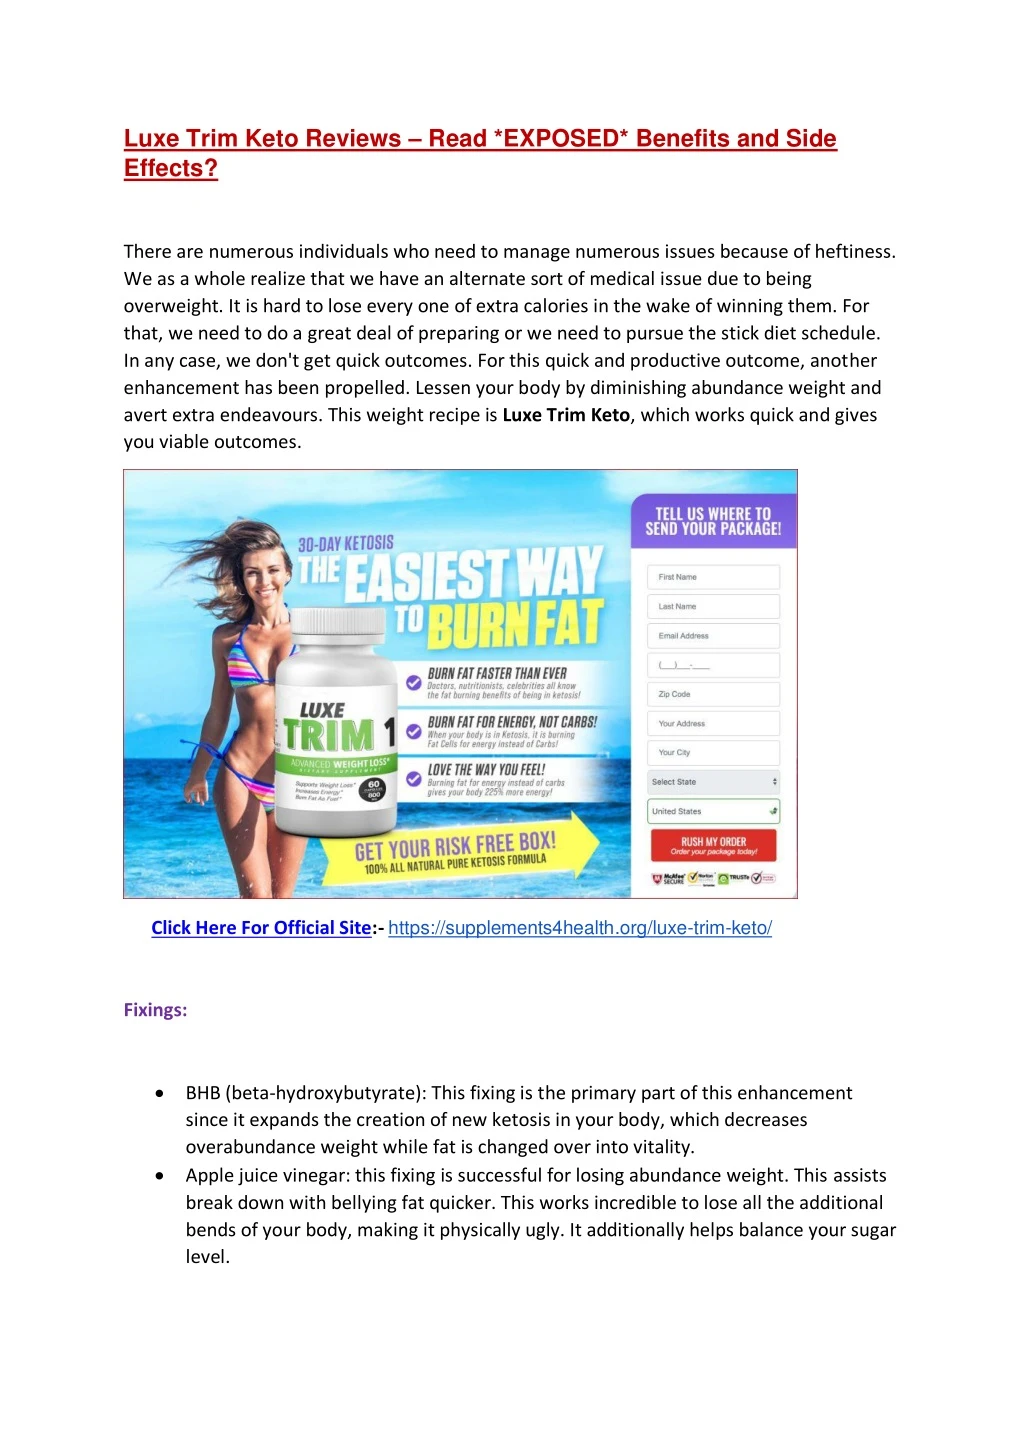 luxe trim keto reviews read exposed benefits